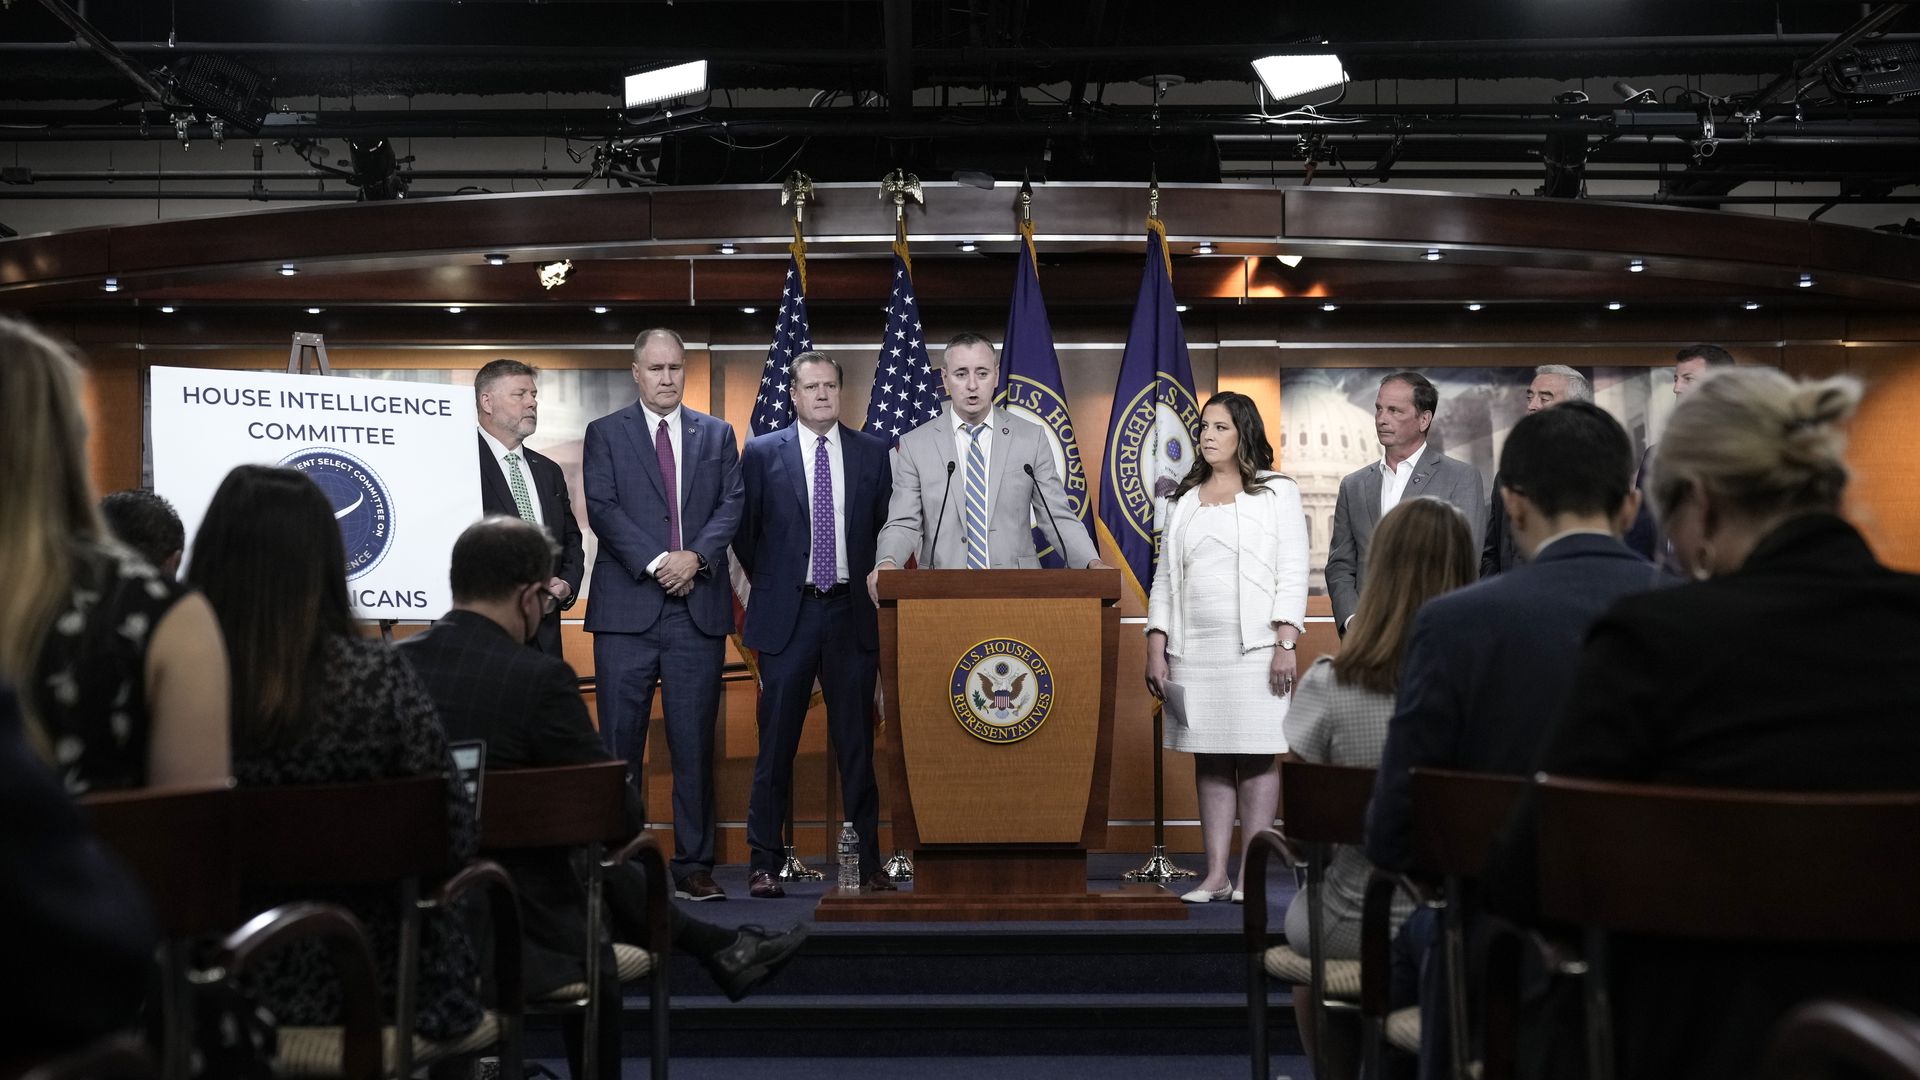 Rep. Brian Fitzpatrick (R-PA) speaks during a news conference at the U.S. Capitol August 12, 2022 in Washington, DC